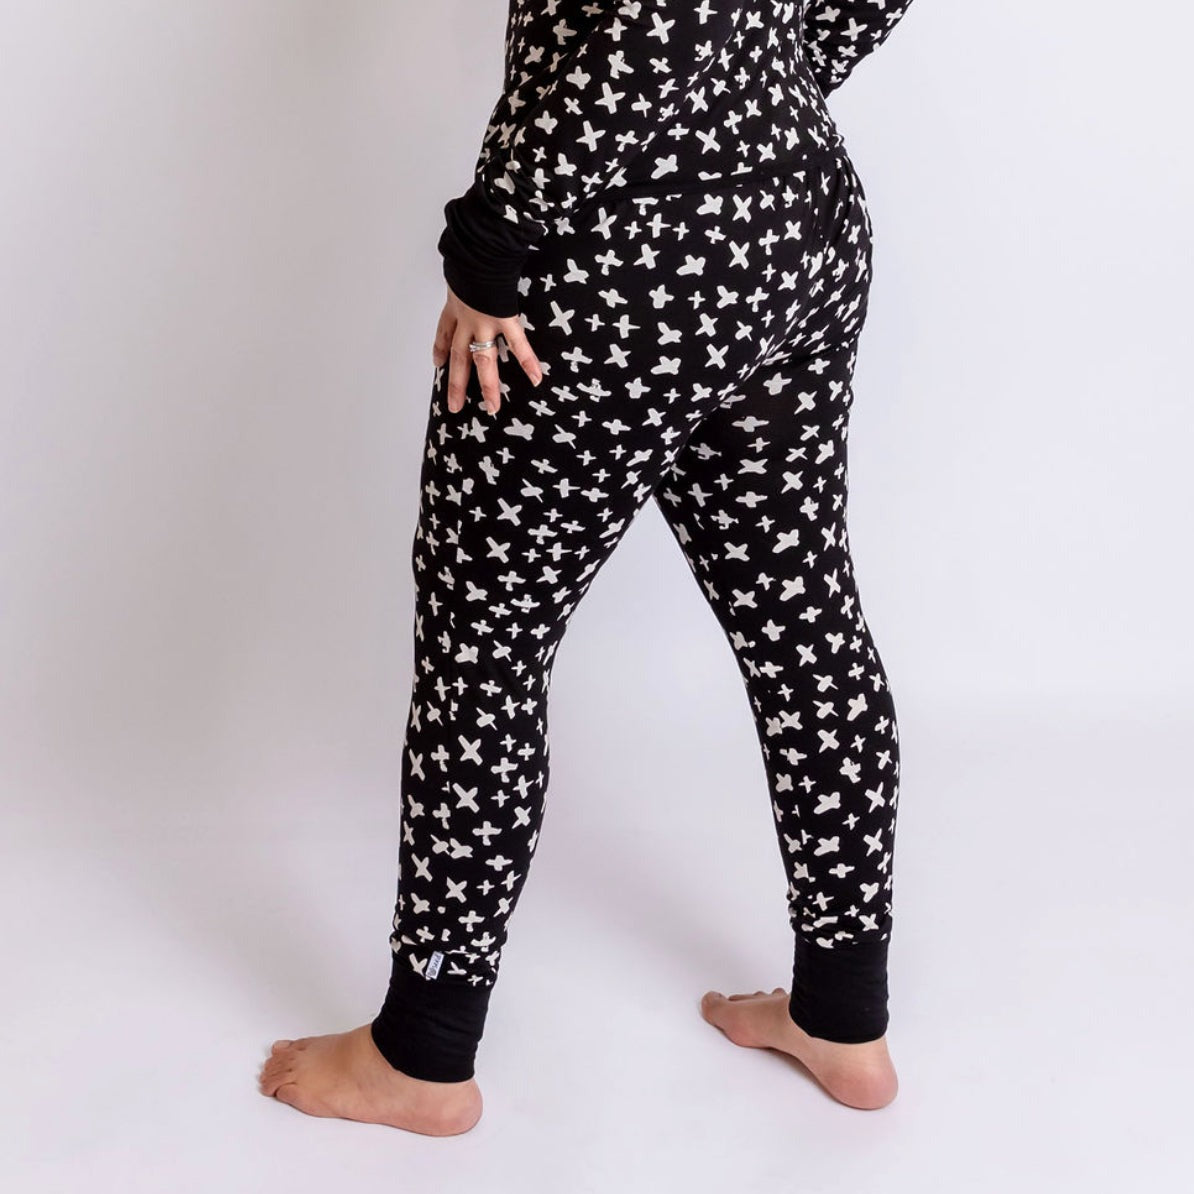 X Marks the Spot Black At Your Leisure Snap Down Adult Romper